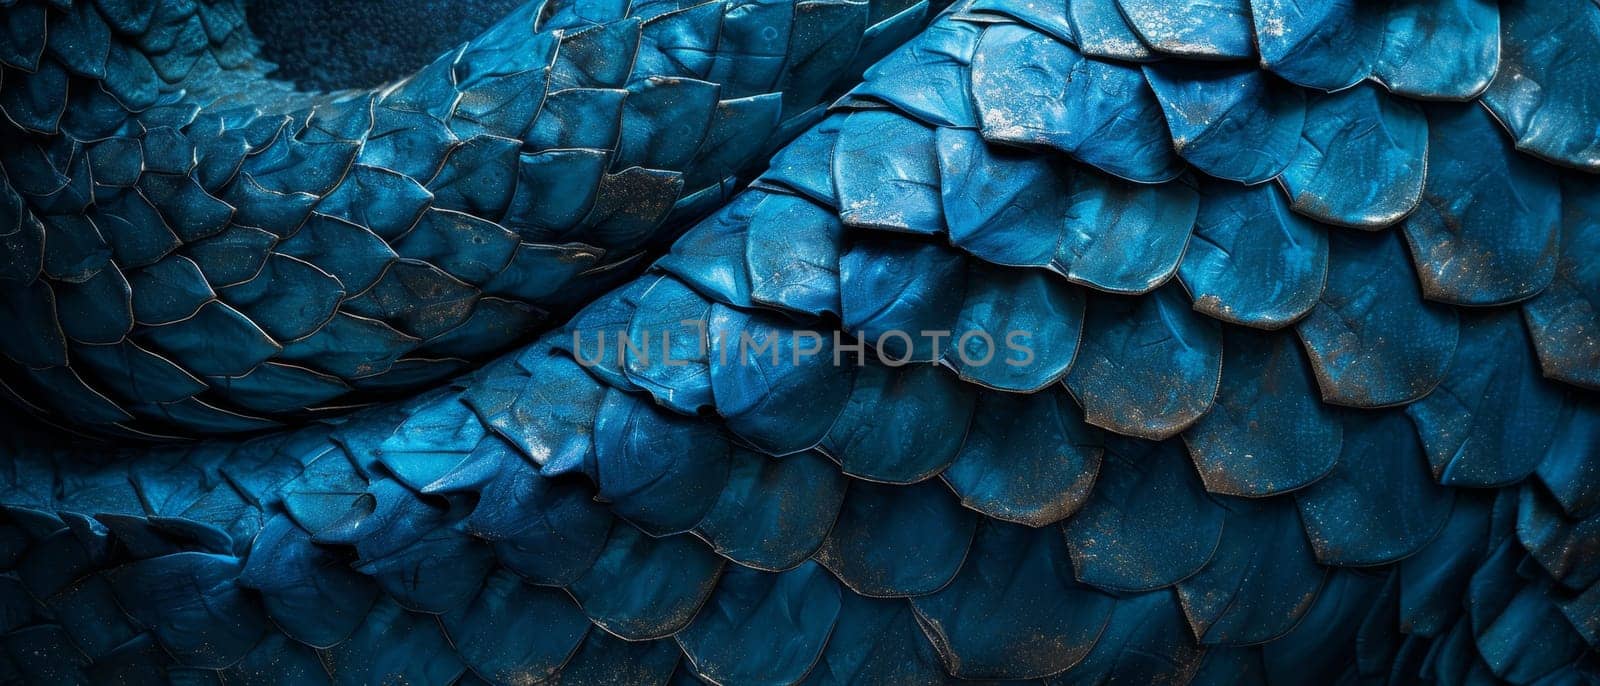 Blue dragon scale pattern close-up - luxury background texture for wallpaper